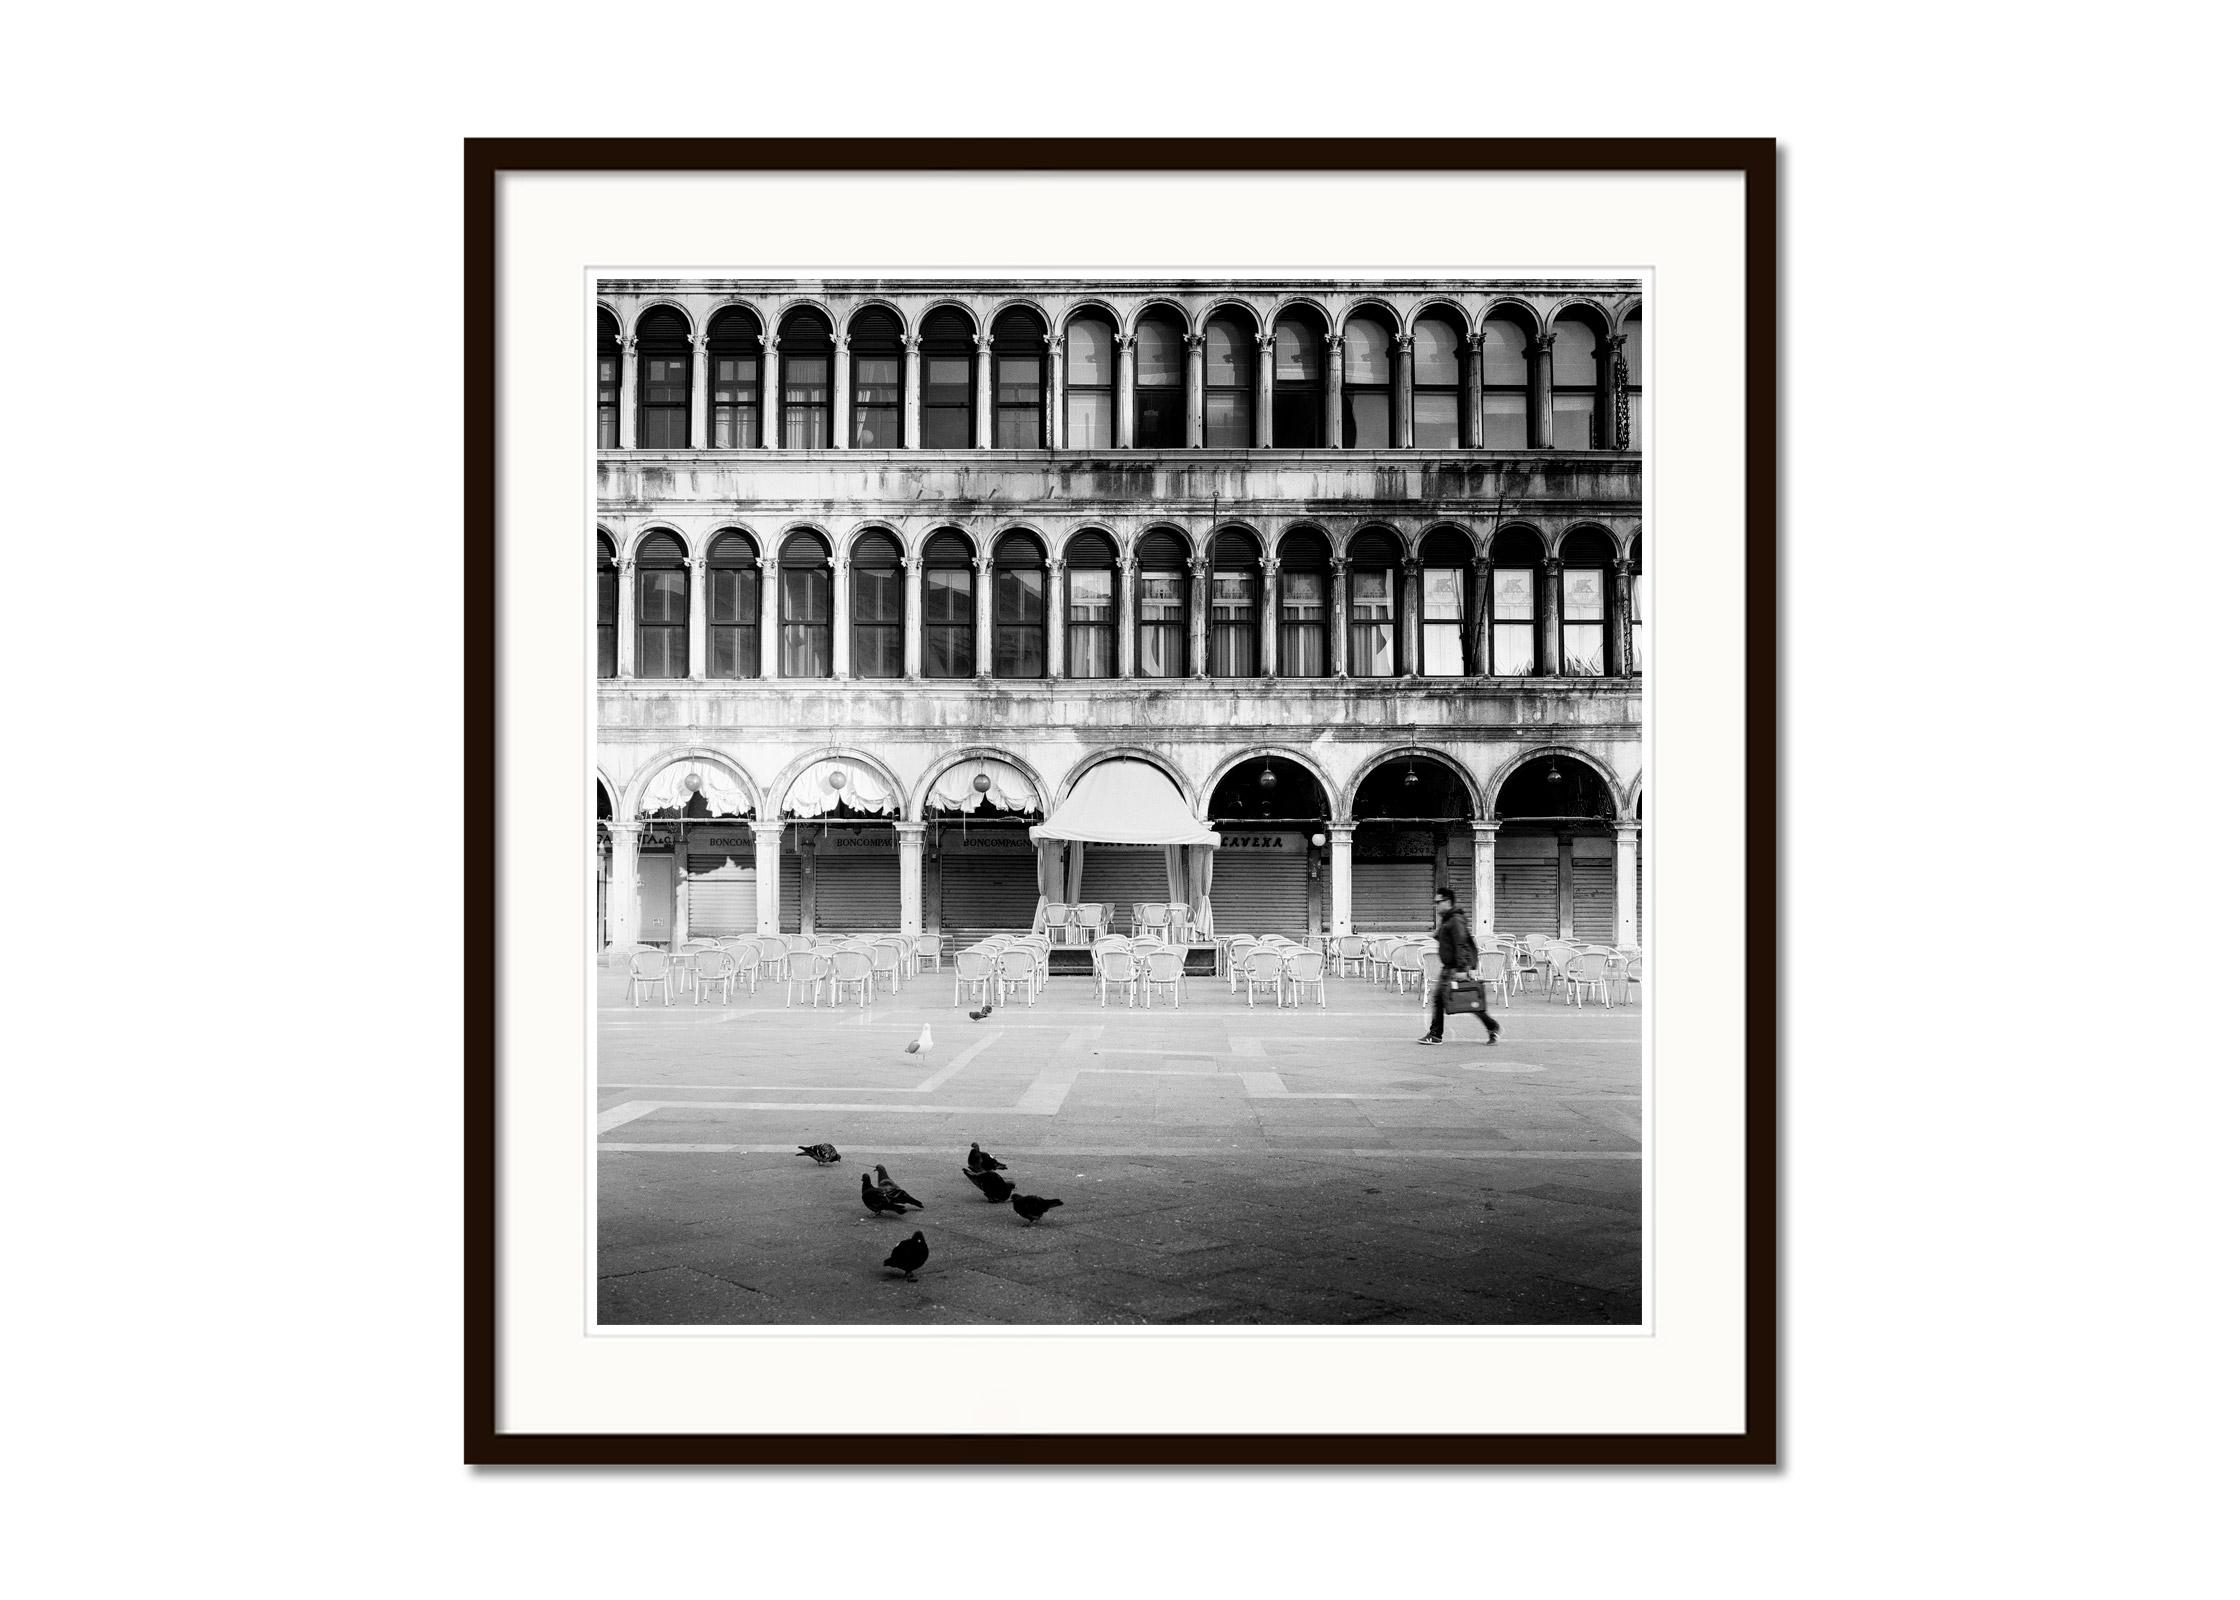 Black and white fine art cityscape photography. Archival pigment ink print as part of a limited edition of 9. All Gerald Berghammer prints are made to order in limited editions on Hahnemuehle Photo Rag Baryta. Each print is stamped on the back and